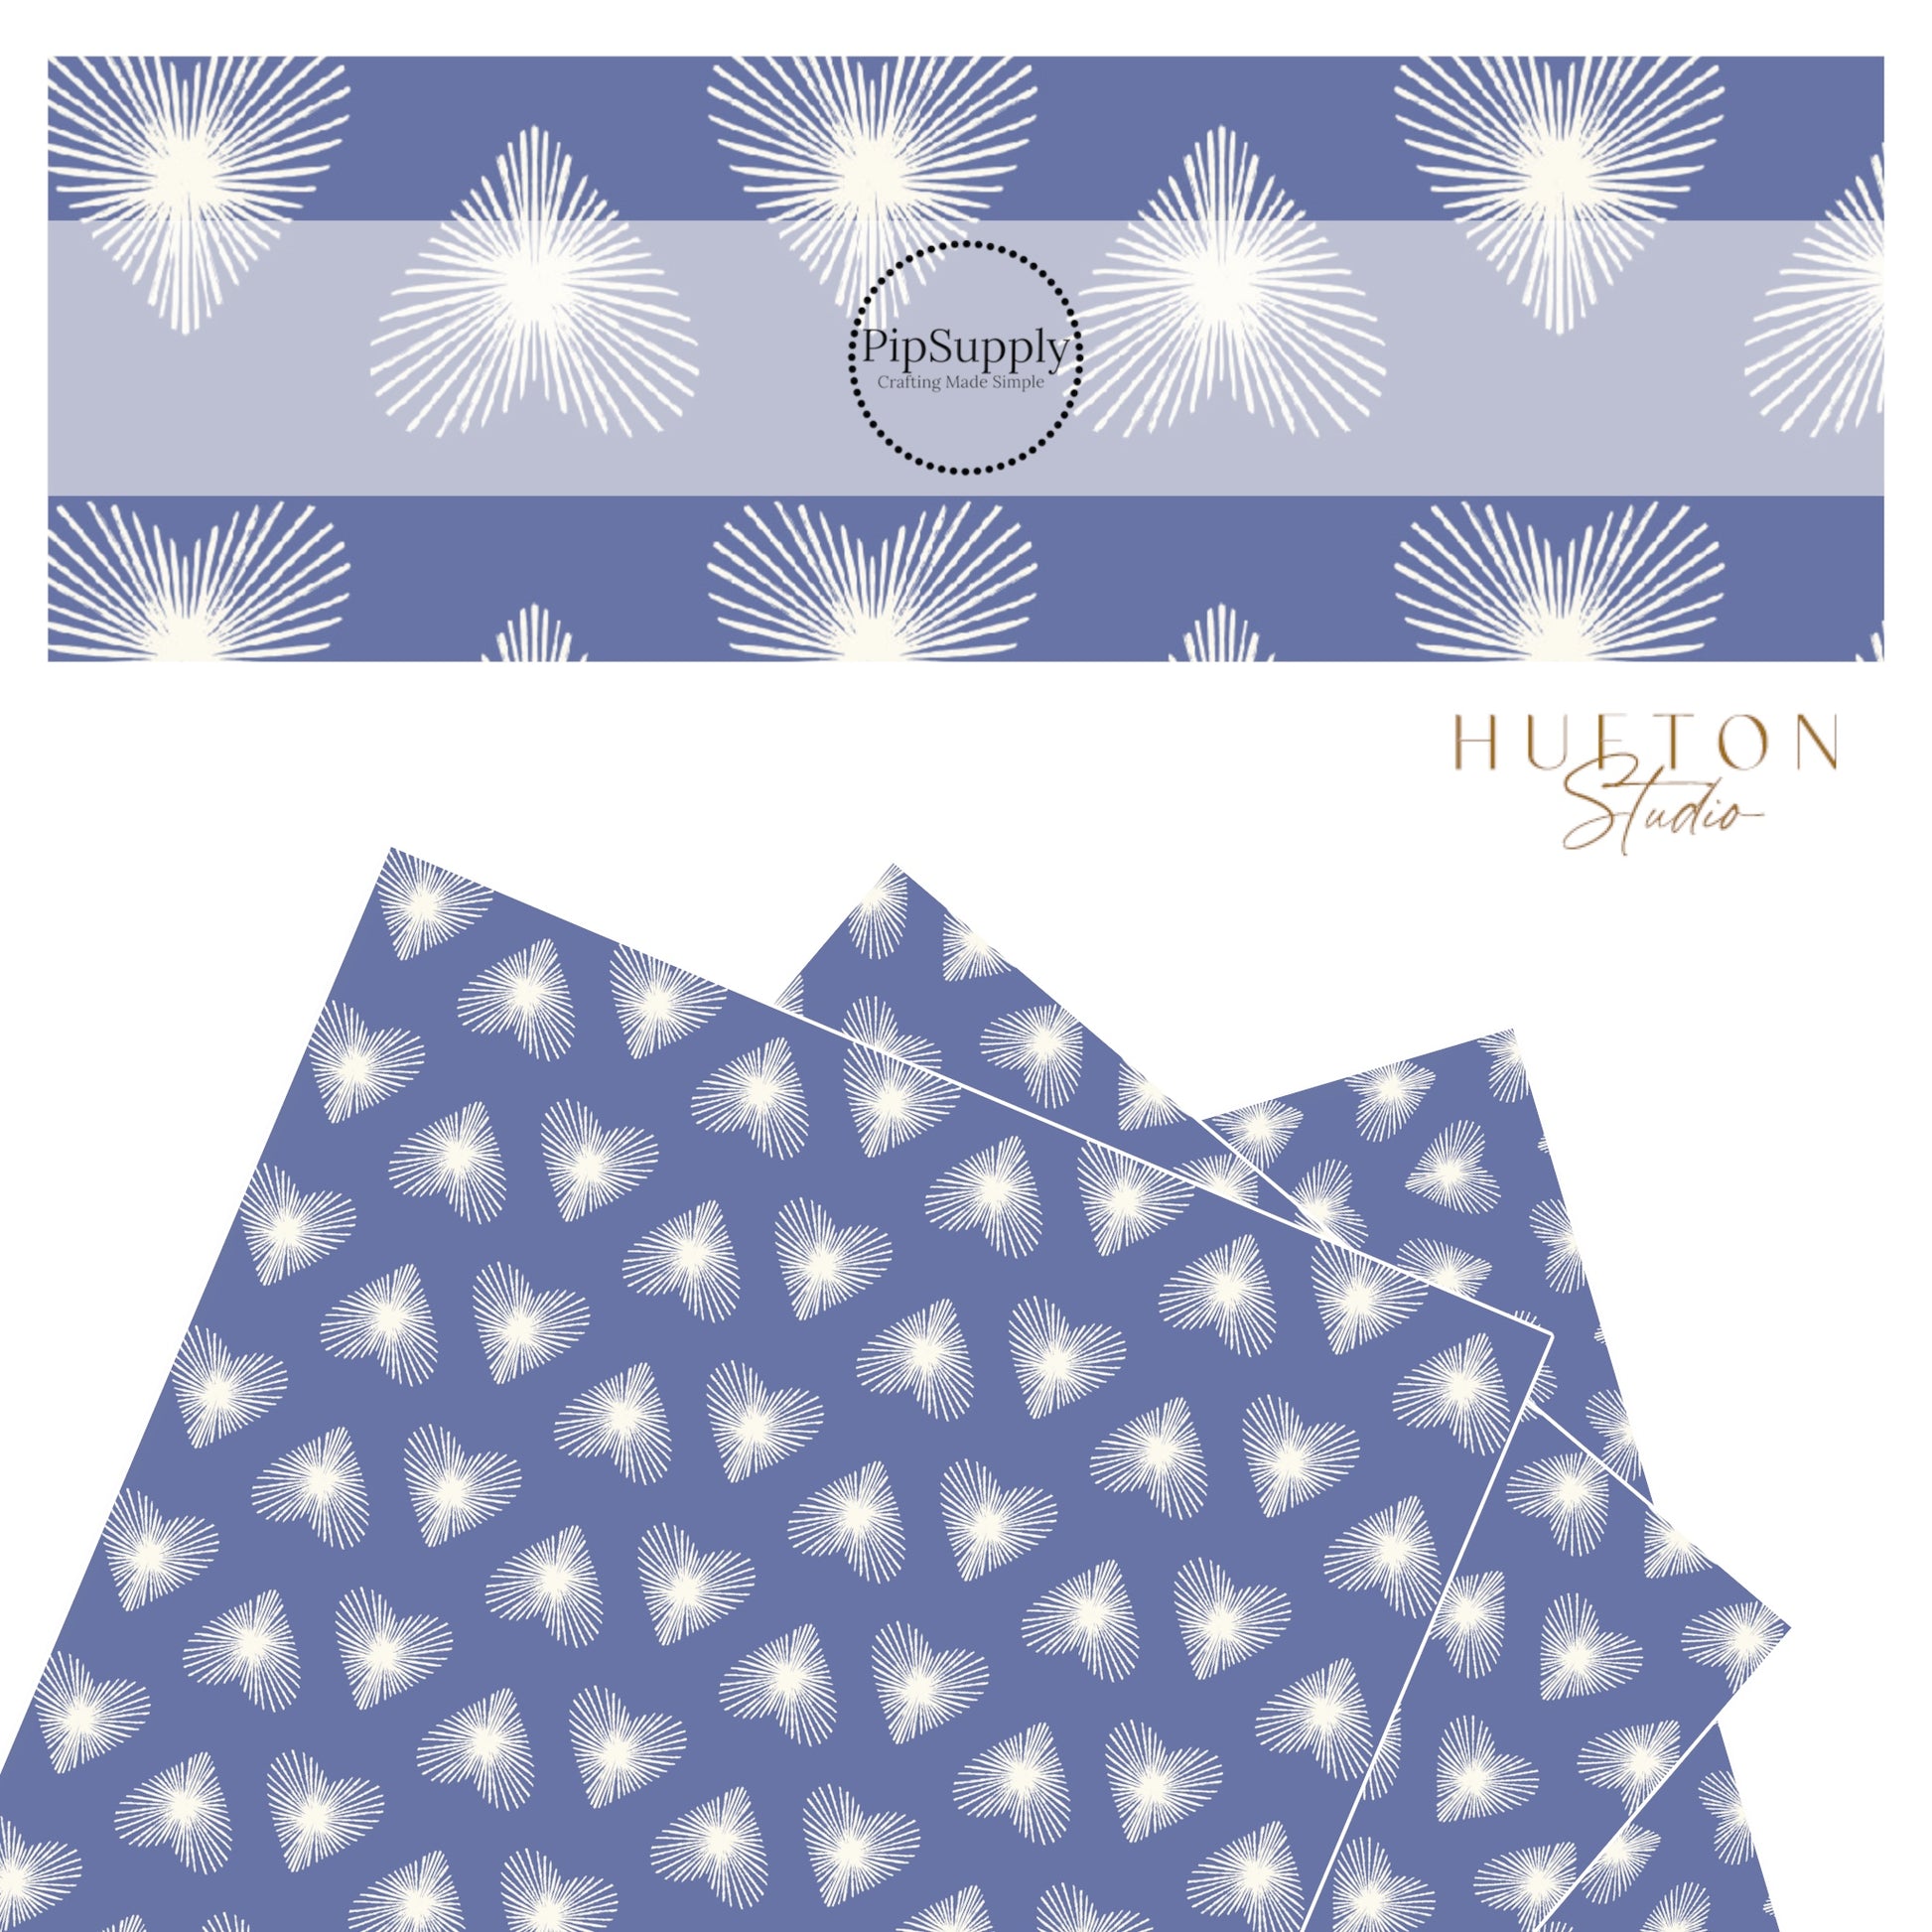 Flared white hearts on blue faux leather sheet